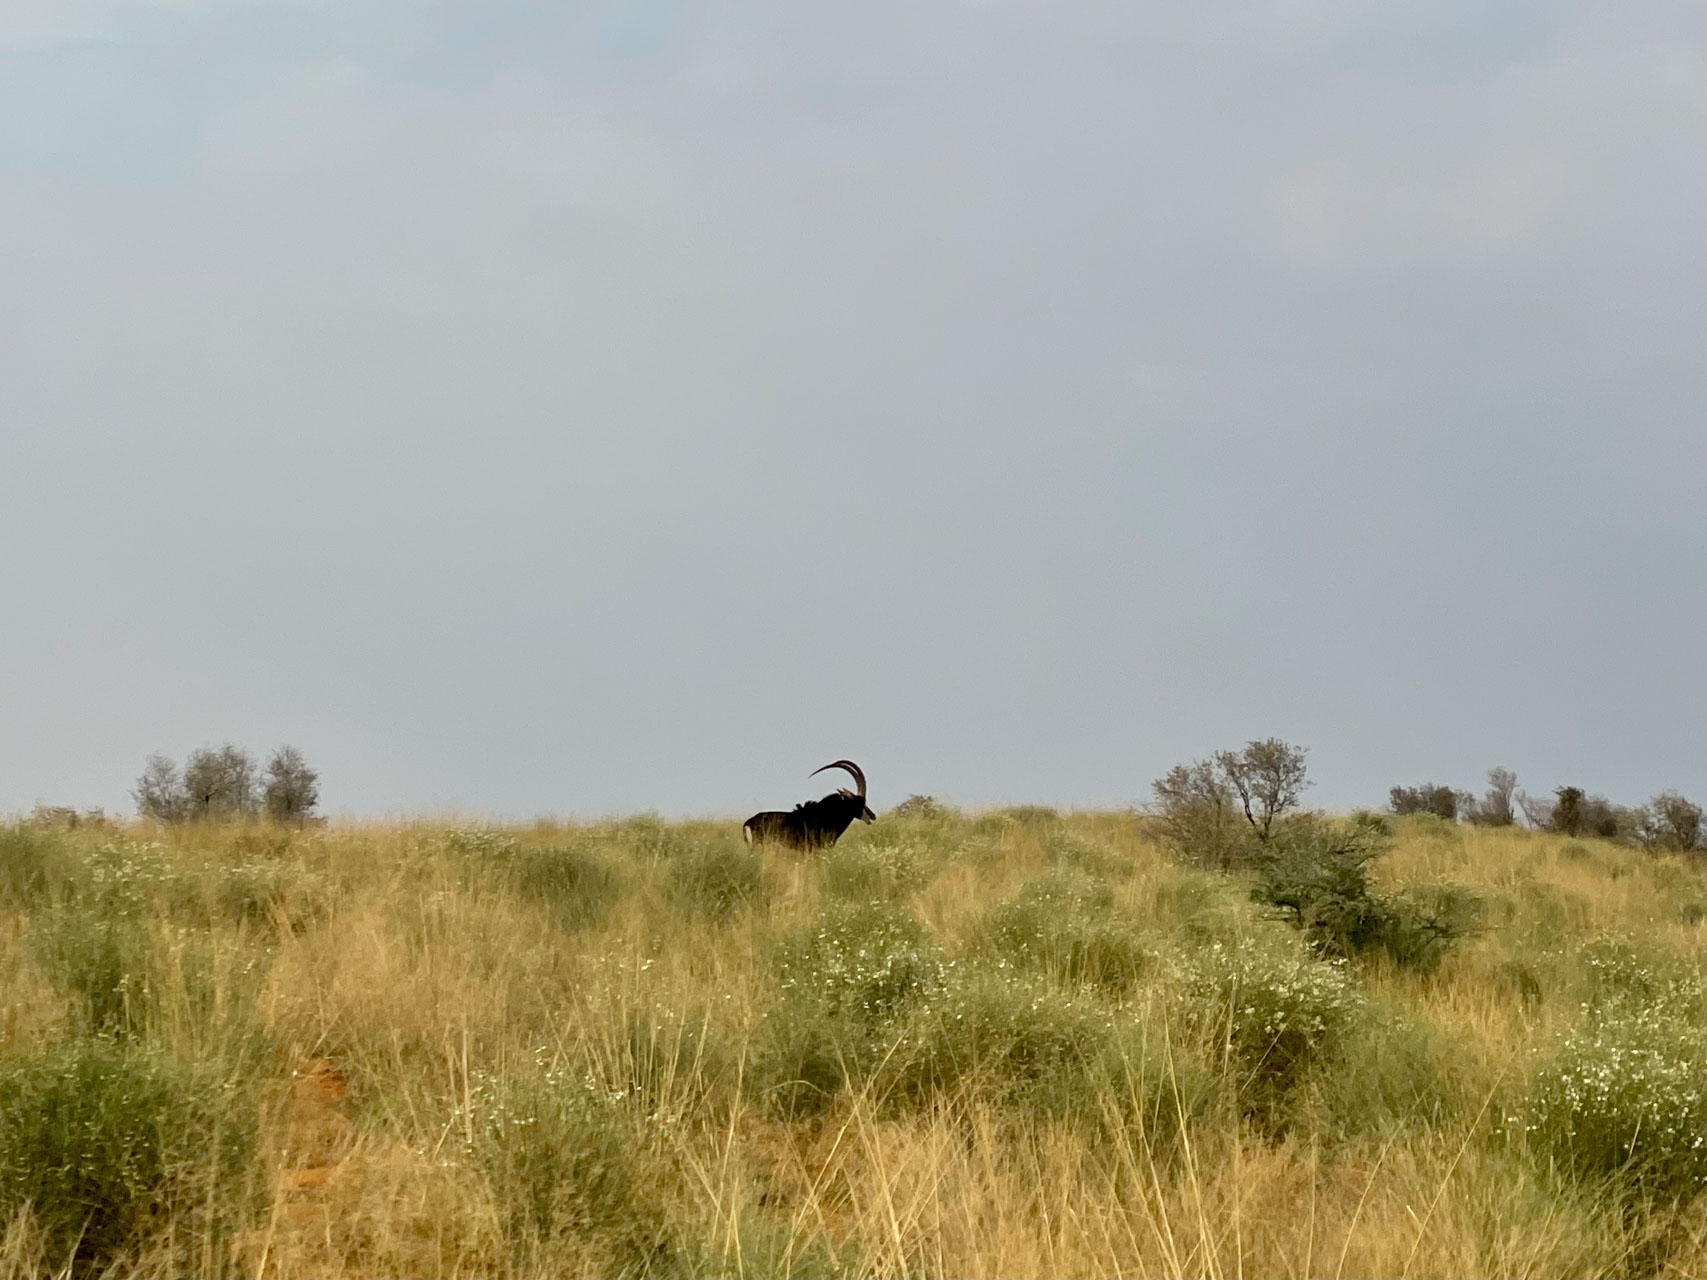 The proud sable — one antelope you don't get in the Mara